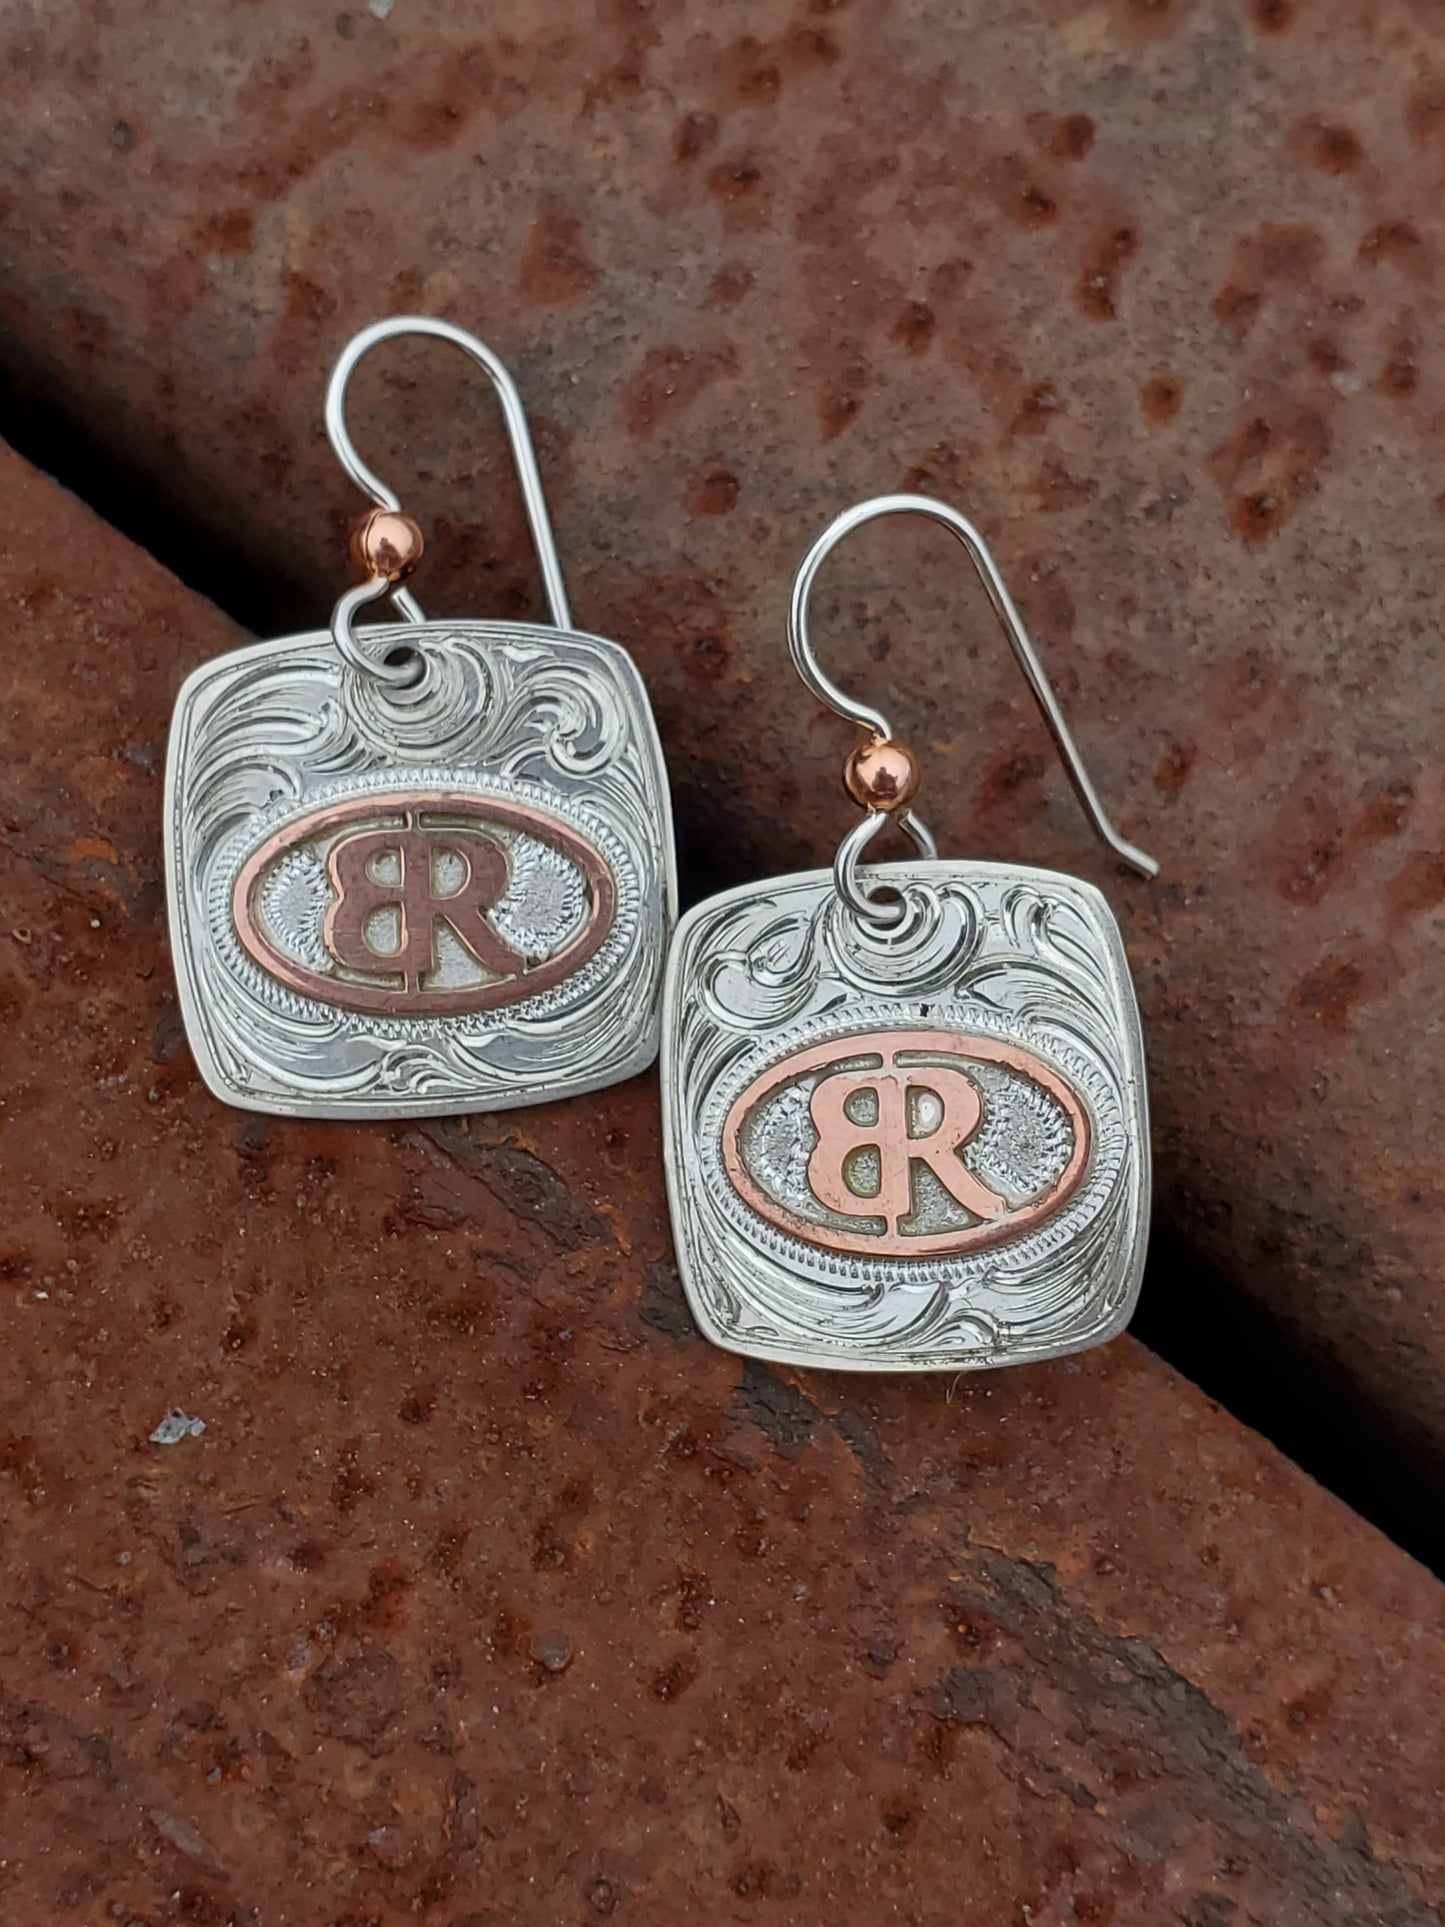 Custom Branded Sterling Silver Earrings, Personalized Jewelry, Copper Cattle Brand, Initial or Monogrammed Gift for Her